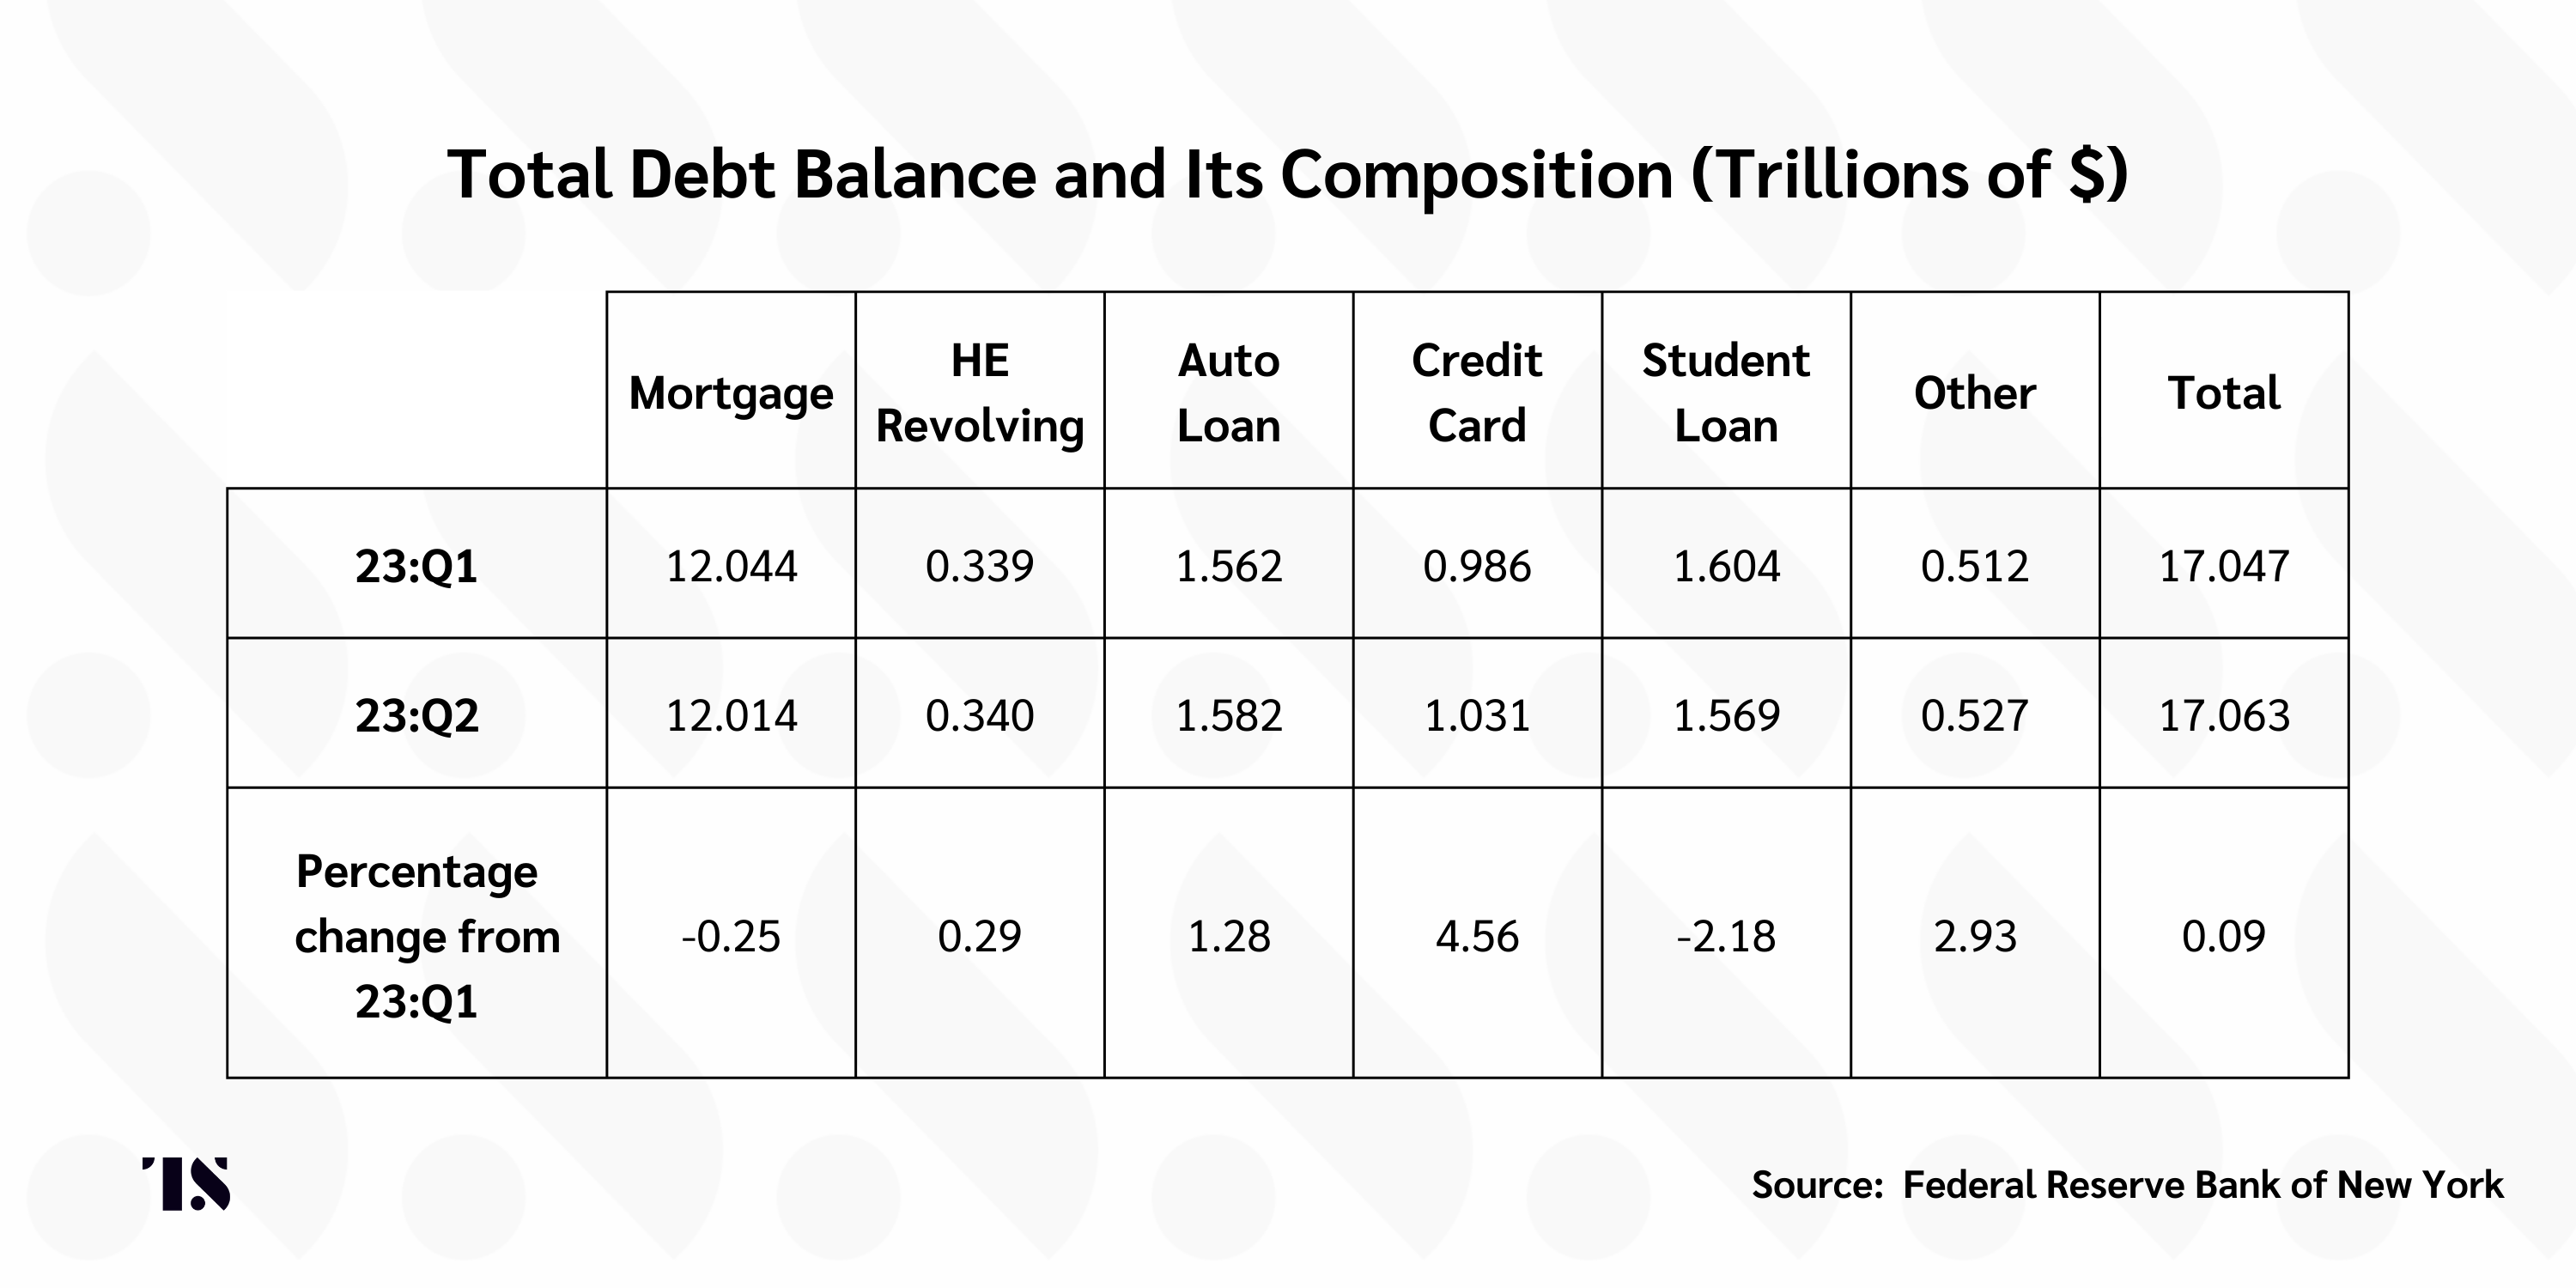 Table showing the total debt balance and composition in trillions of dollars, during Q1 and Q2 of 2023. 
Only Mortgage and Student loans have experienced any decreases, other categories such as Auto Loans, Credit Cards, Student Debt have increased. 